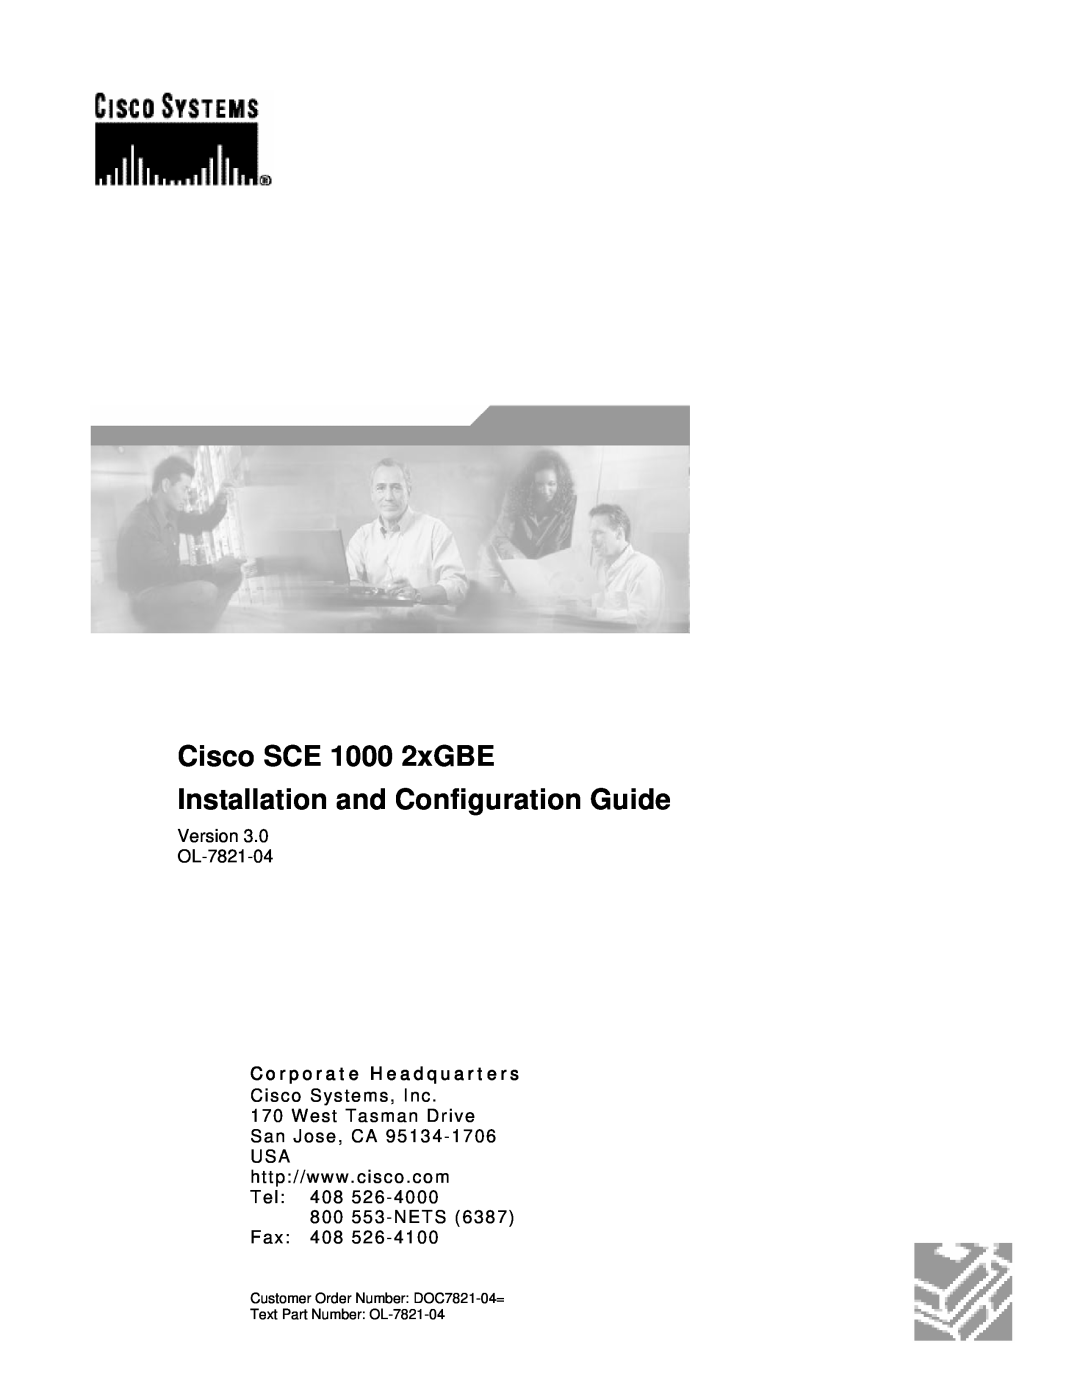 Cisco Systems manual Cisco SCE 1000 2xGBE Installation and Configuration Guide, Version OL-7821-04 